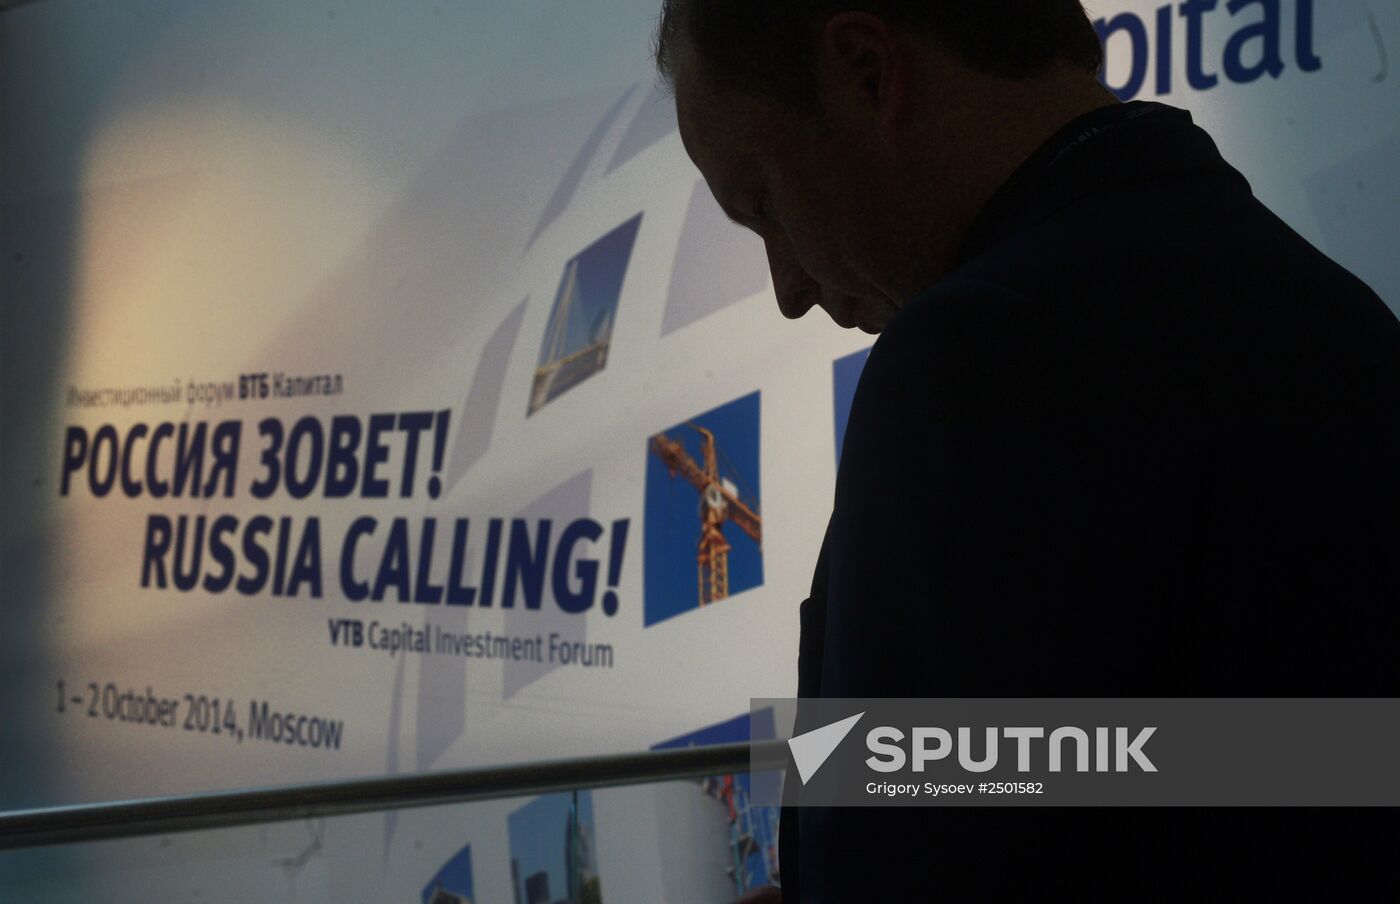 VTB Capital's sixth annual "RUSSIA CALLING!" Investment Forum. Day One